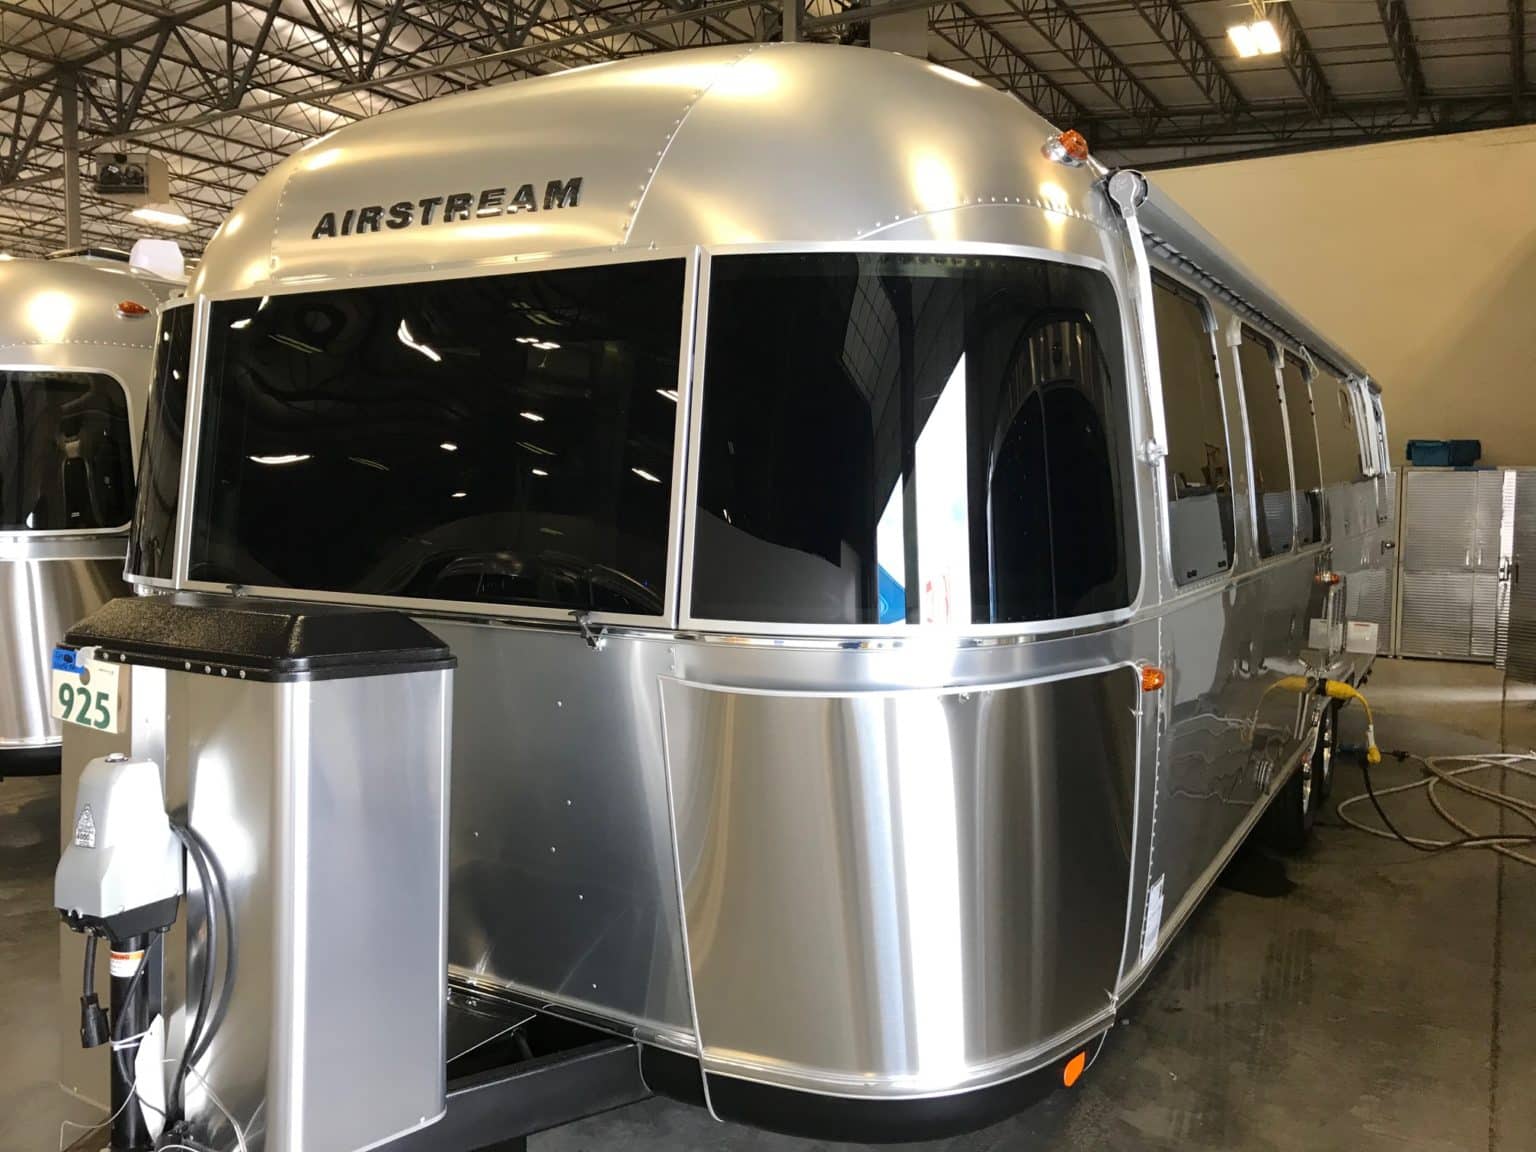 2020 Airstream 30ft Classic For Sale In St George Airstream Marketplace